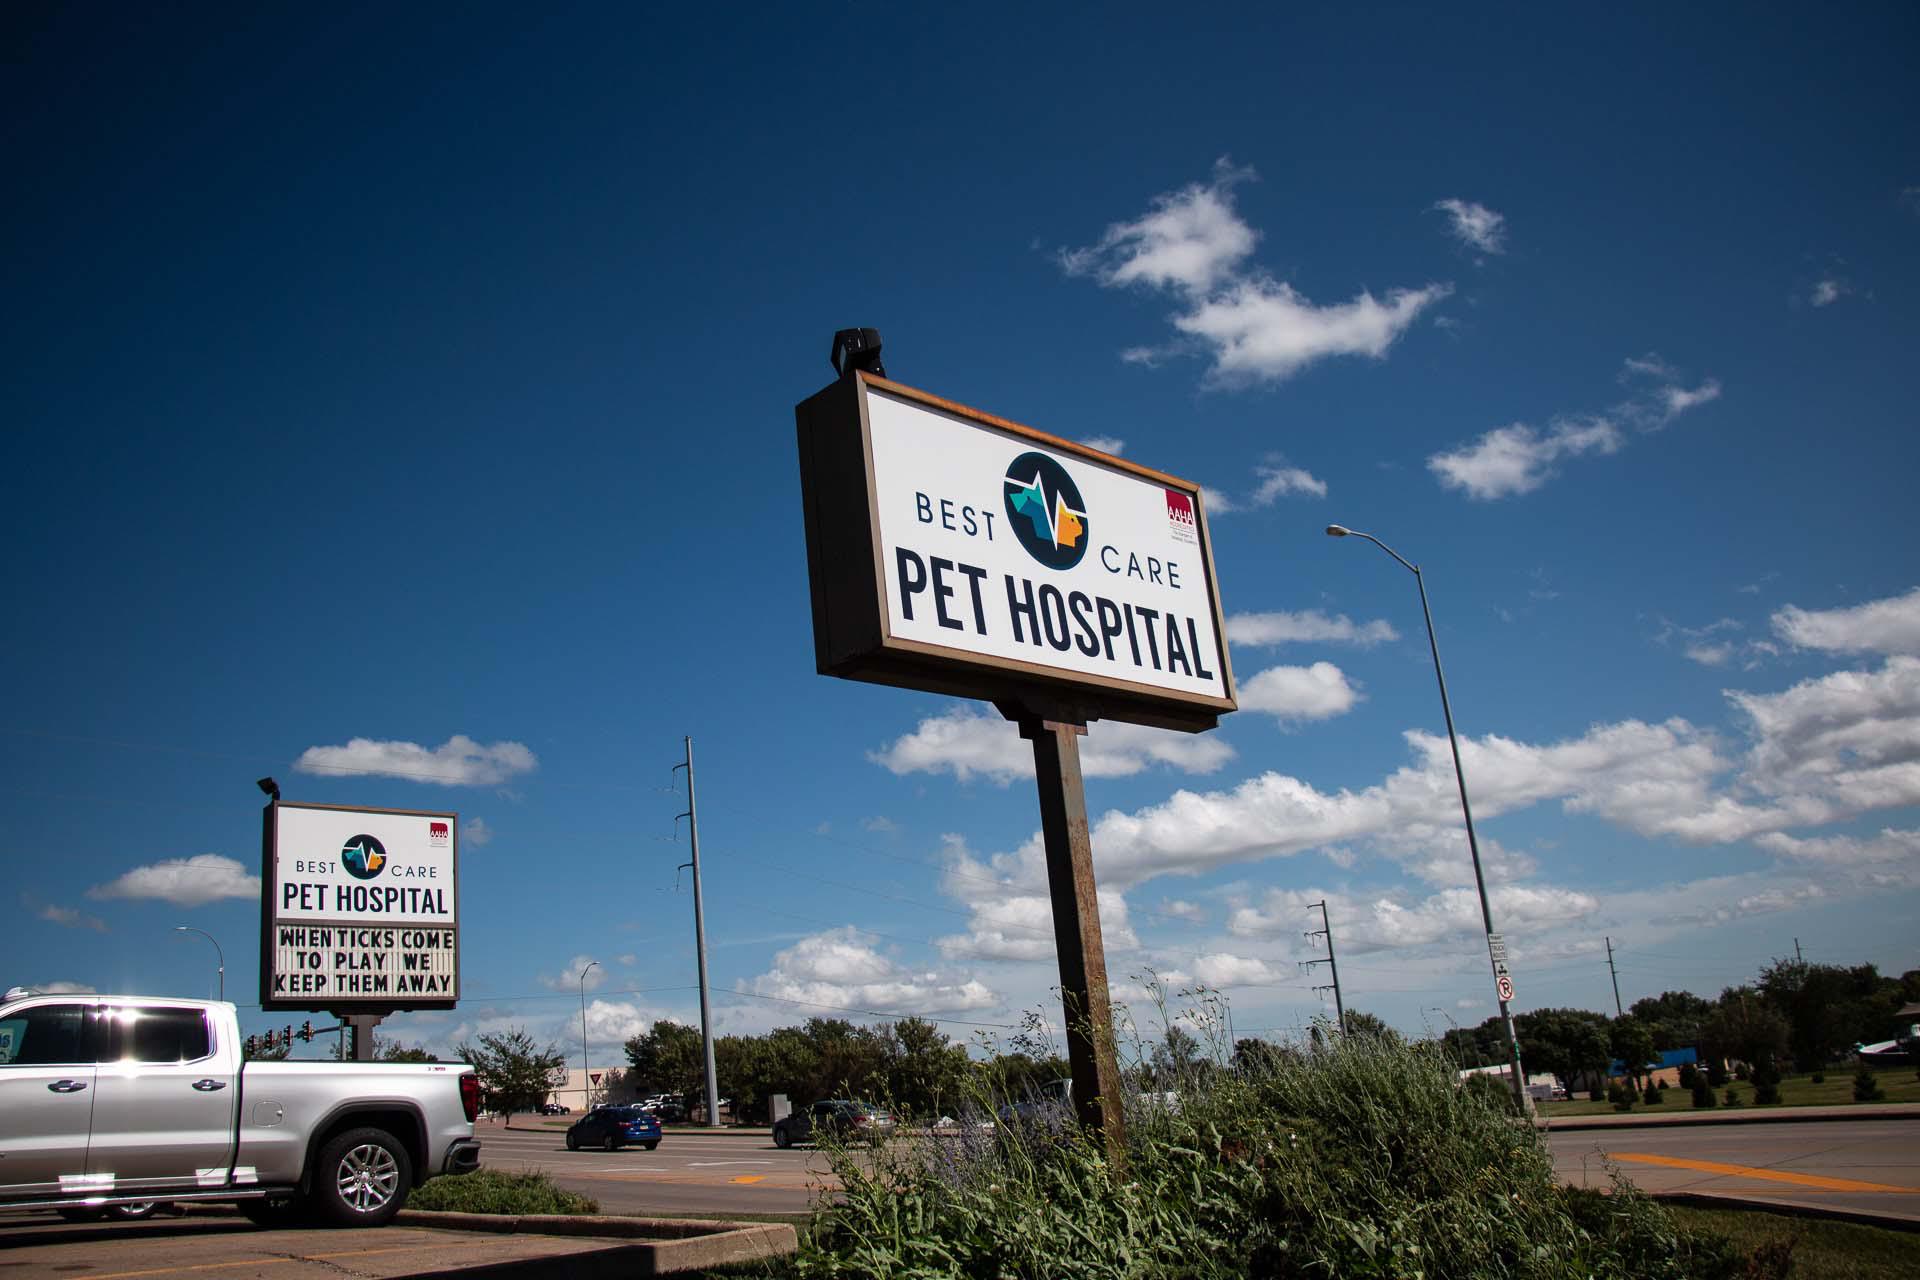 Welcome to Best Care Pet Hospital!